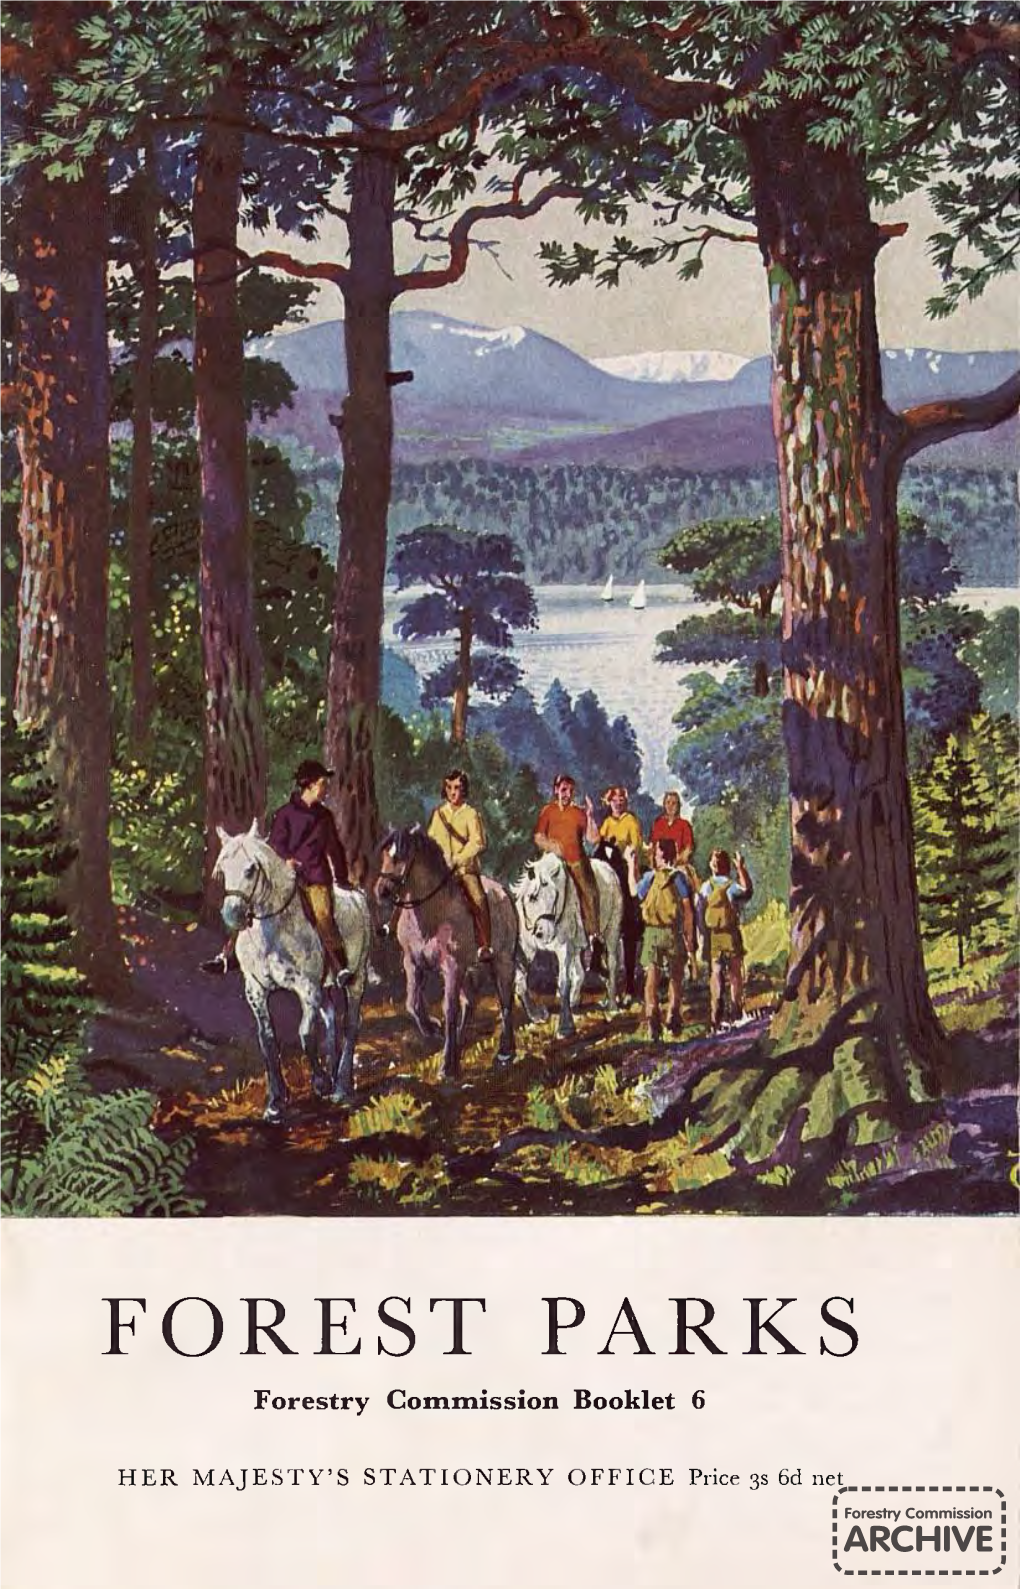 Forestry Commission Booklet: Forest Parks